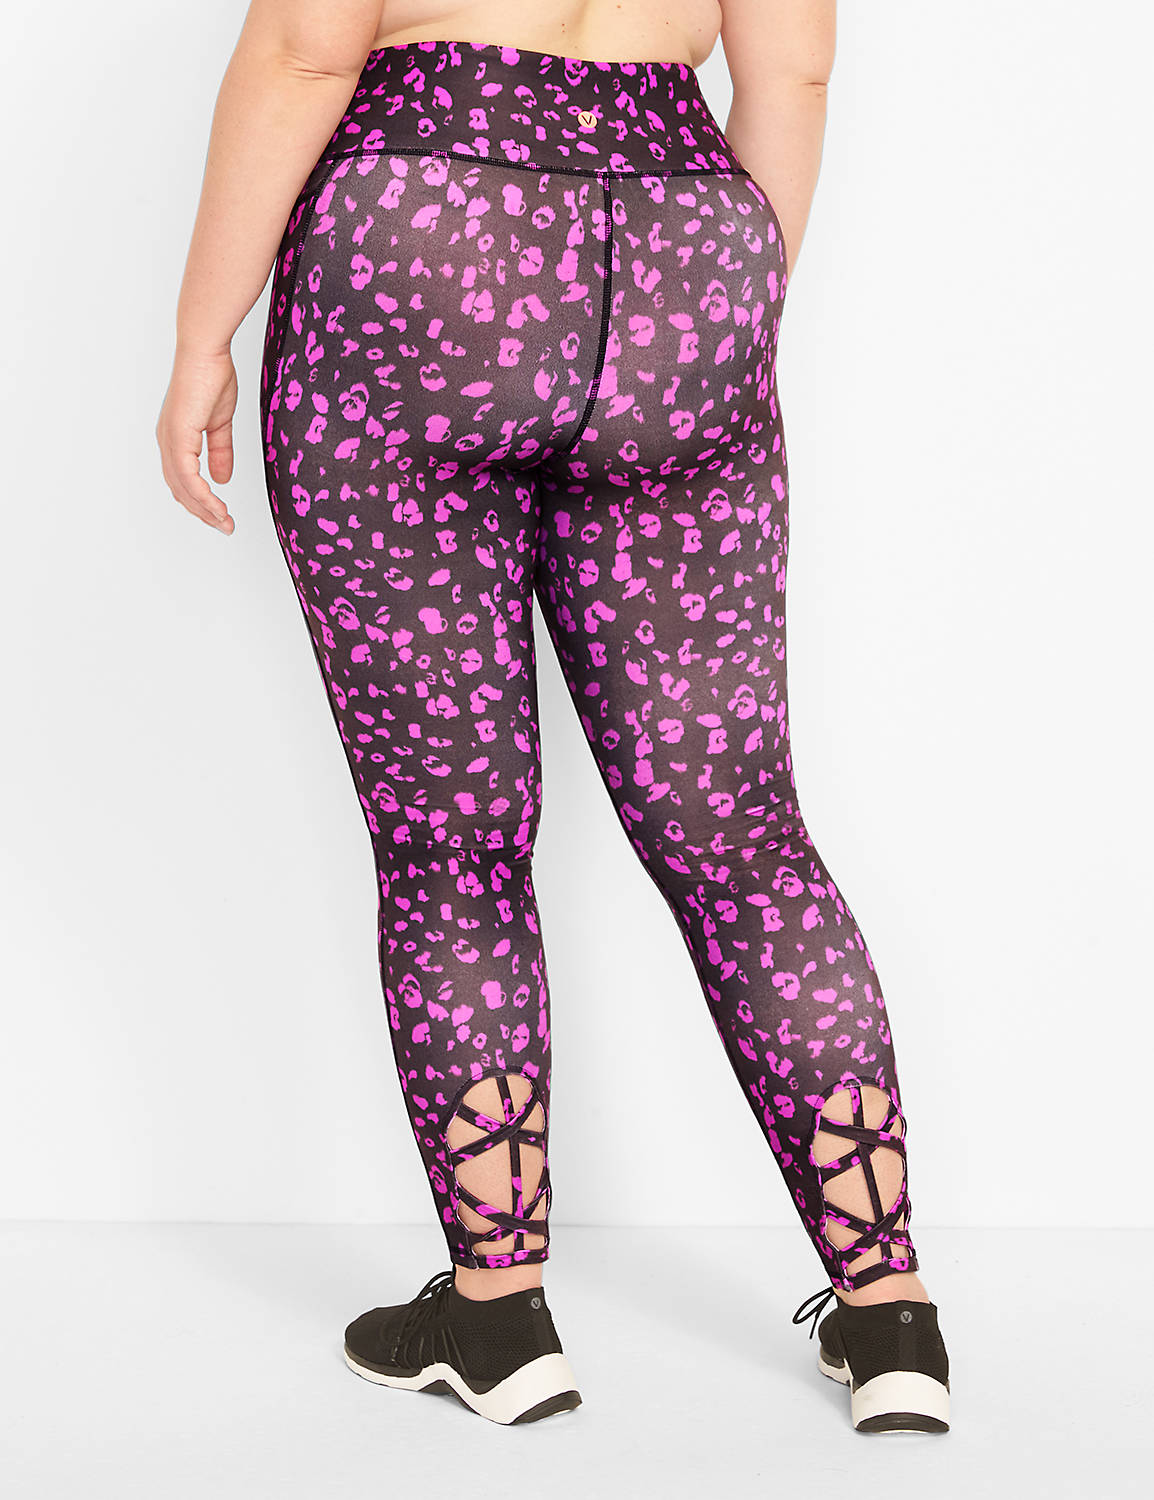 LIVI High Rise Wicking 7/8 Legging Strappy Hem Detail S 1124195:LBH21094_FloralRushSmall_V2_CW2:22/24 Product Image 2